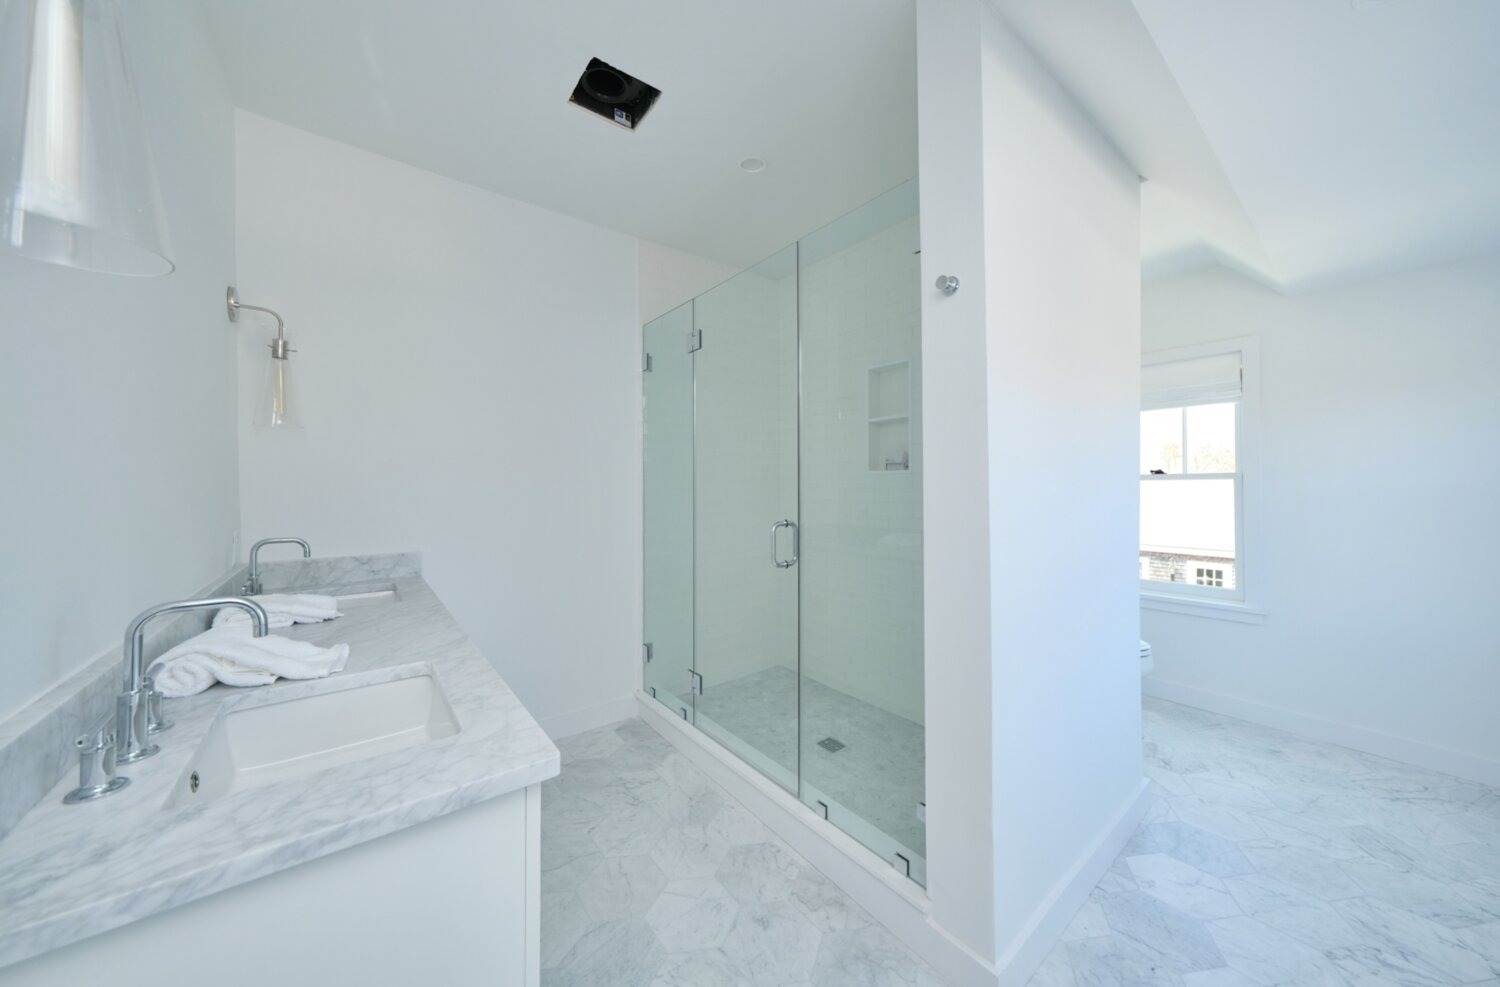 The master bath has a glass shower and dual vanities.